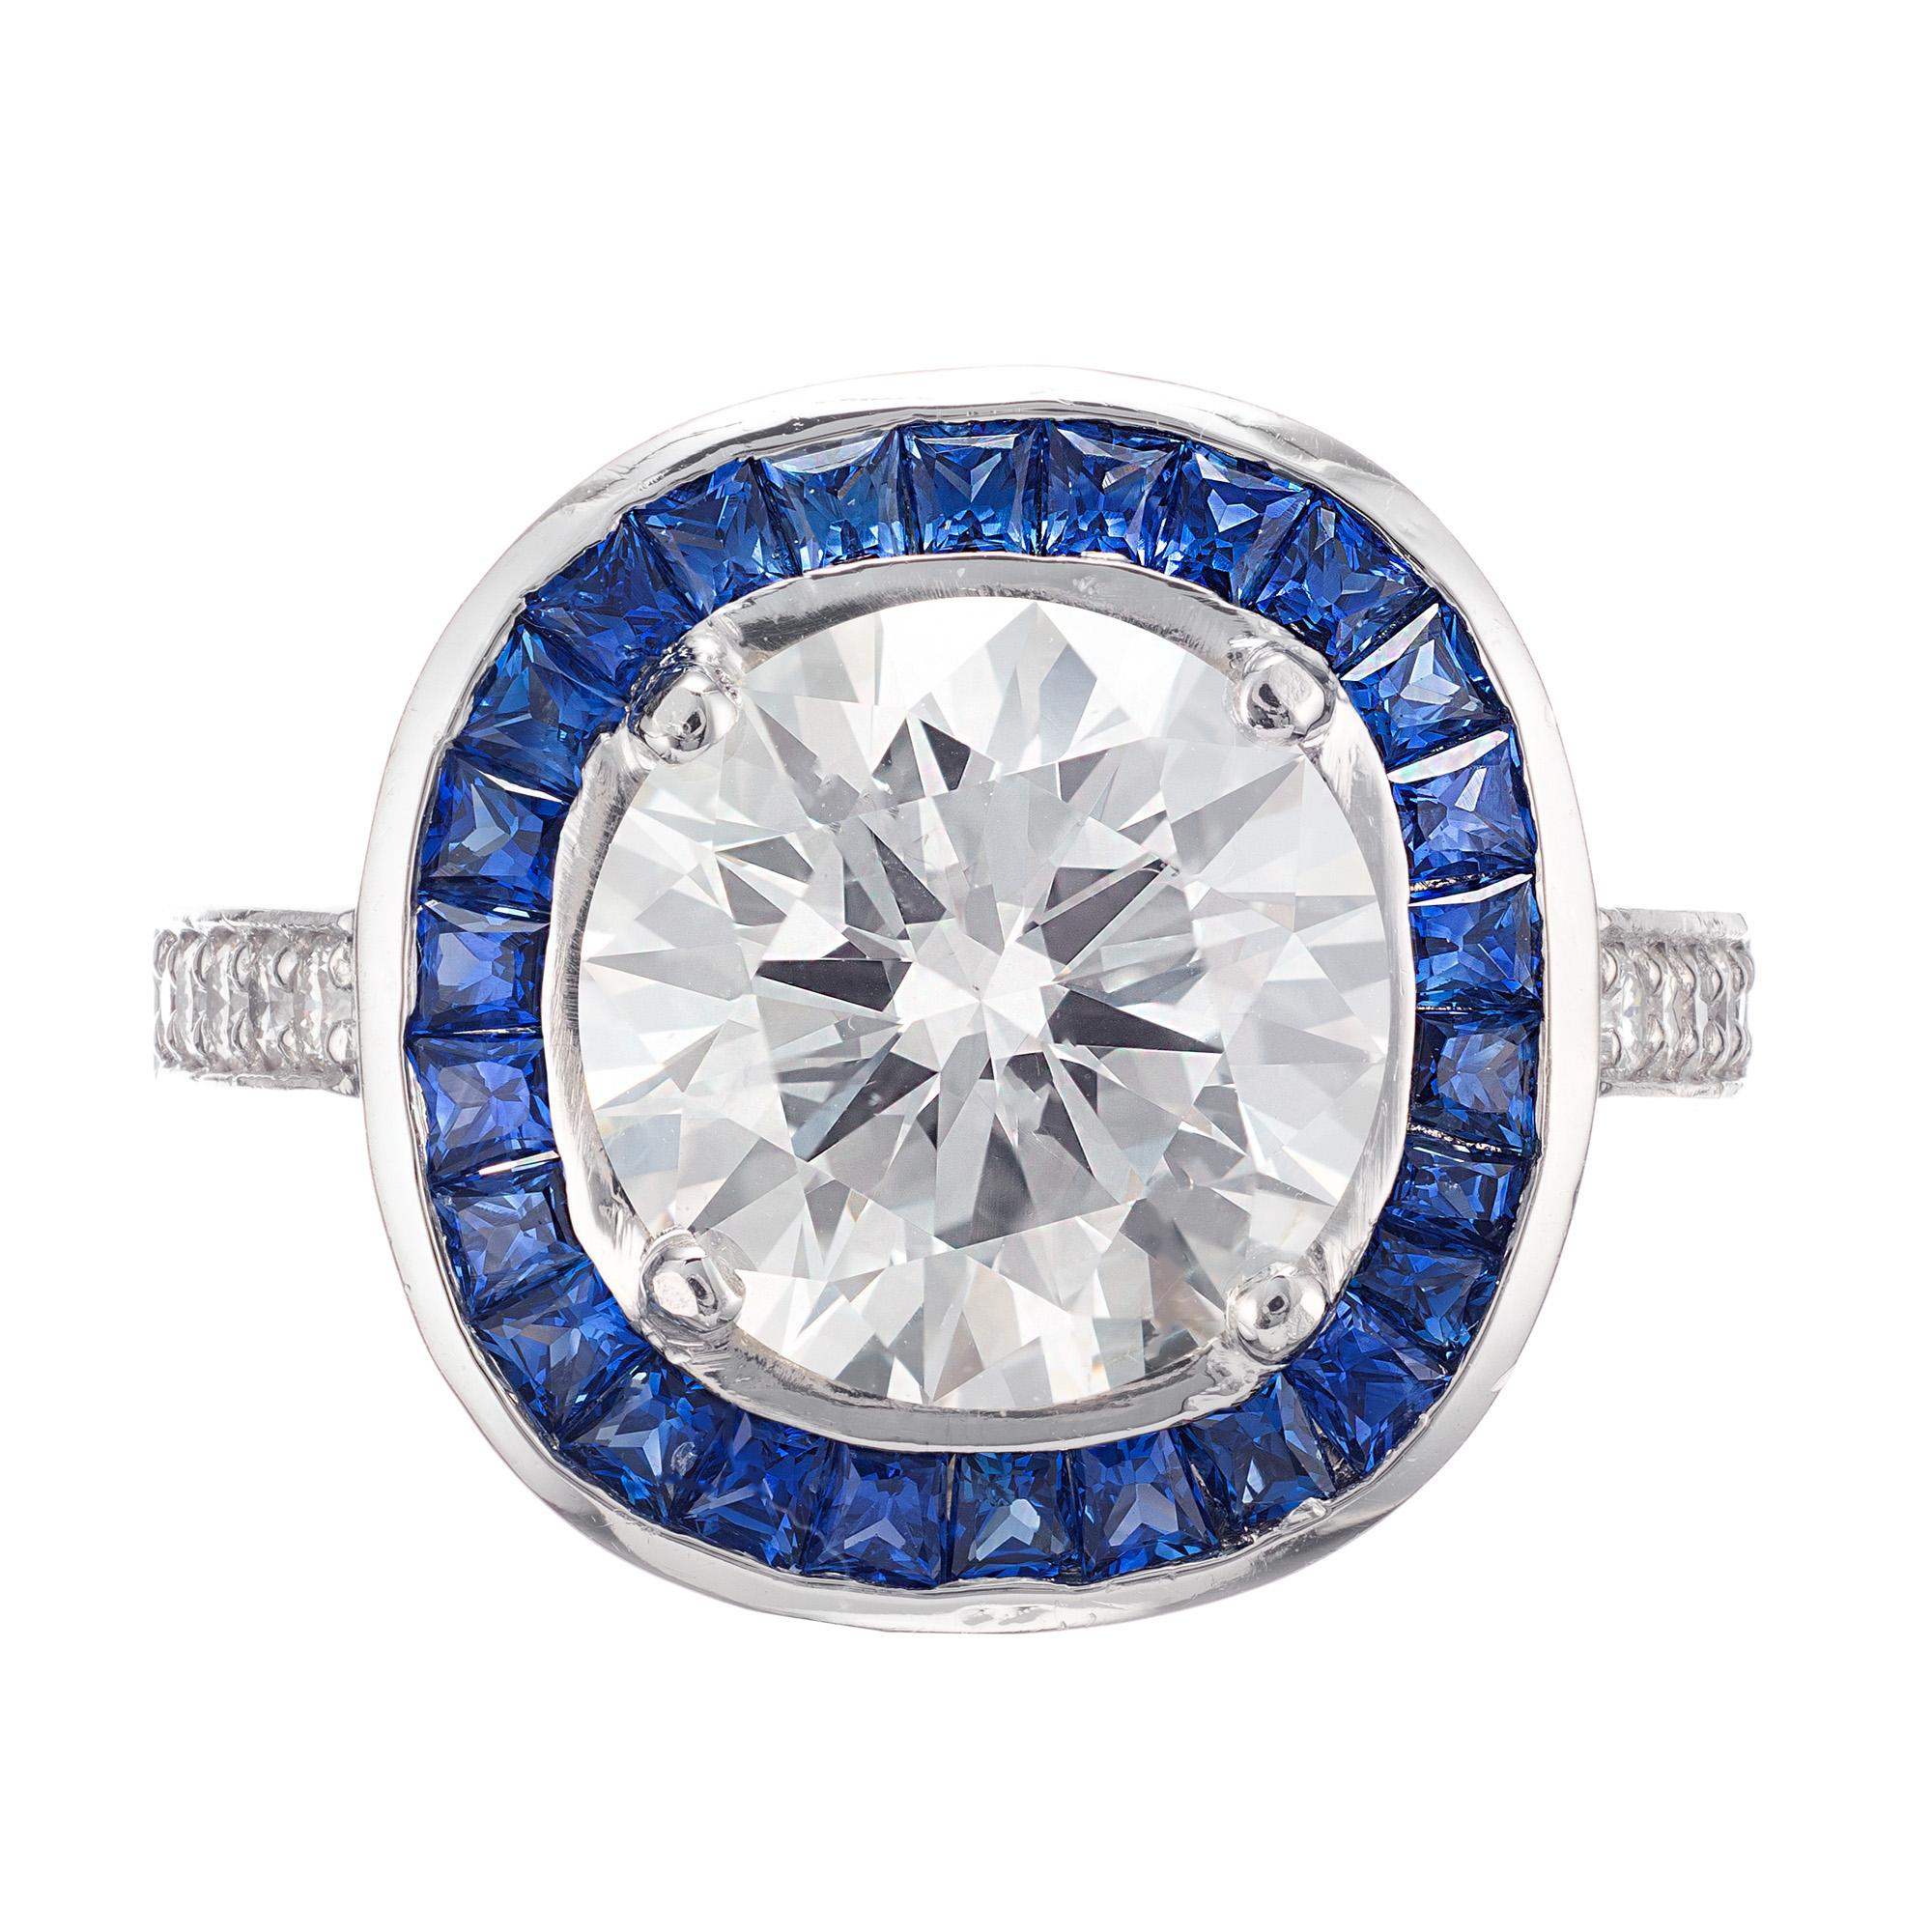 Diamond and sapphire engagement ring. GIA certified 3.29 carat round brilliant cut center stone in a platinum setting with a halo of calibre ceylon Sapphires and round accent diamonds. 

1 Round brilliant cut Ideal diamond, approx. total weight